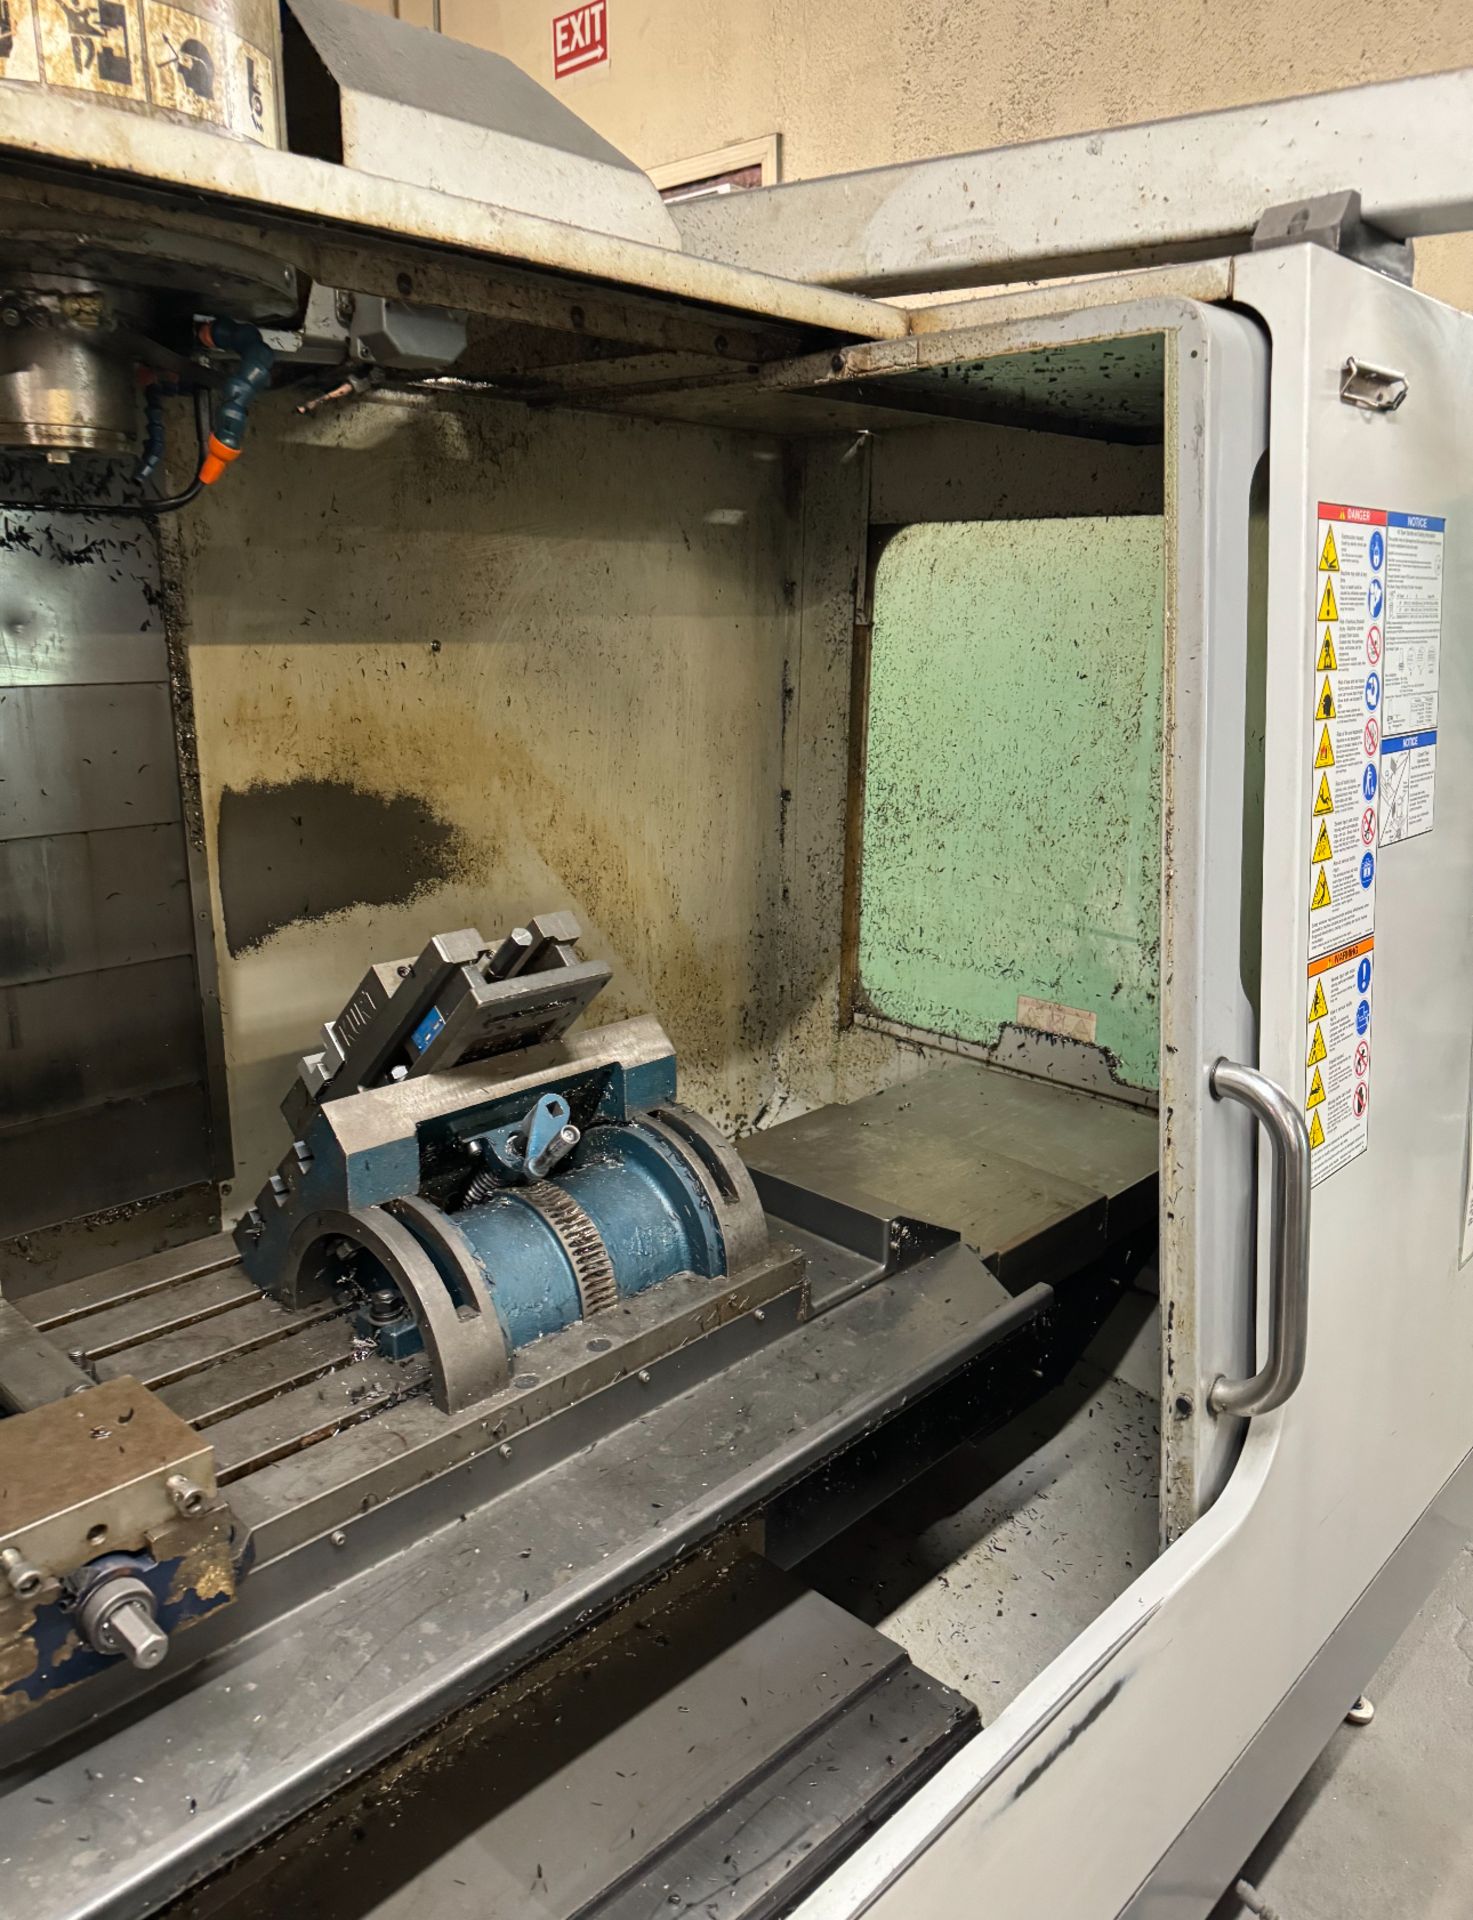 2007 HAAS Mdl. VF 3 SS 4TH Vertical Machining Center - Image 5 of 9